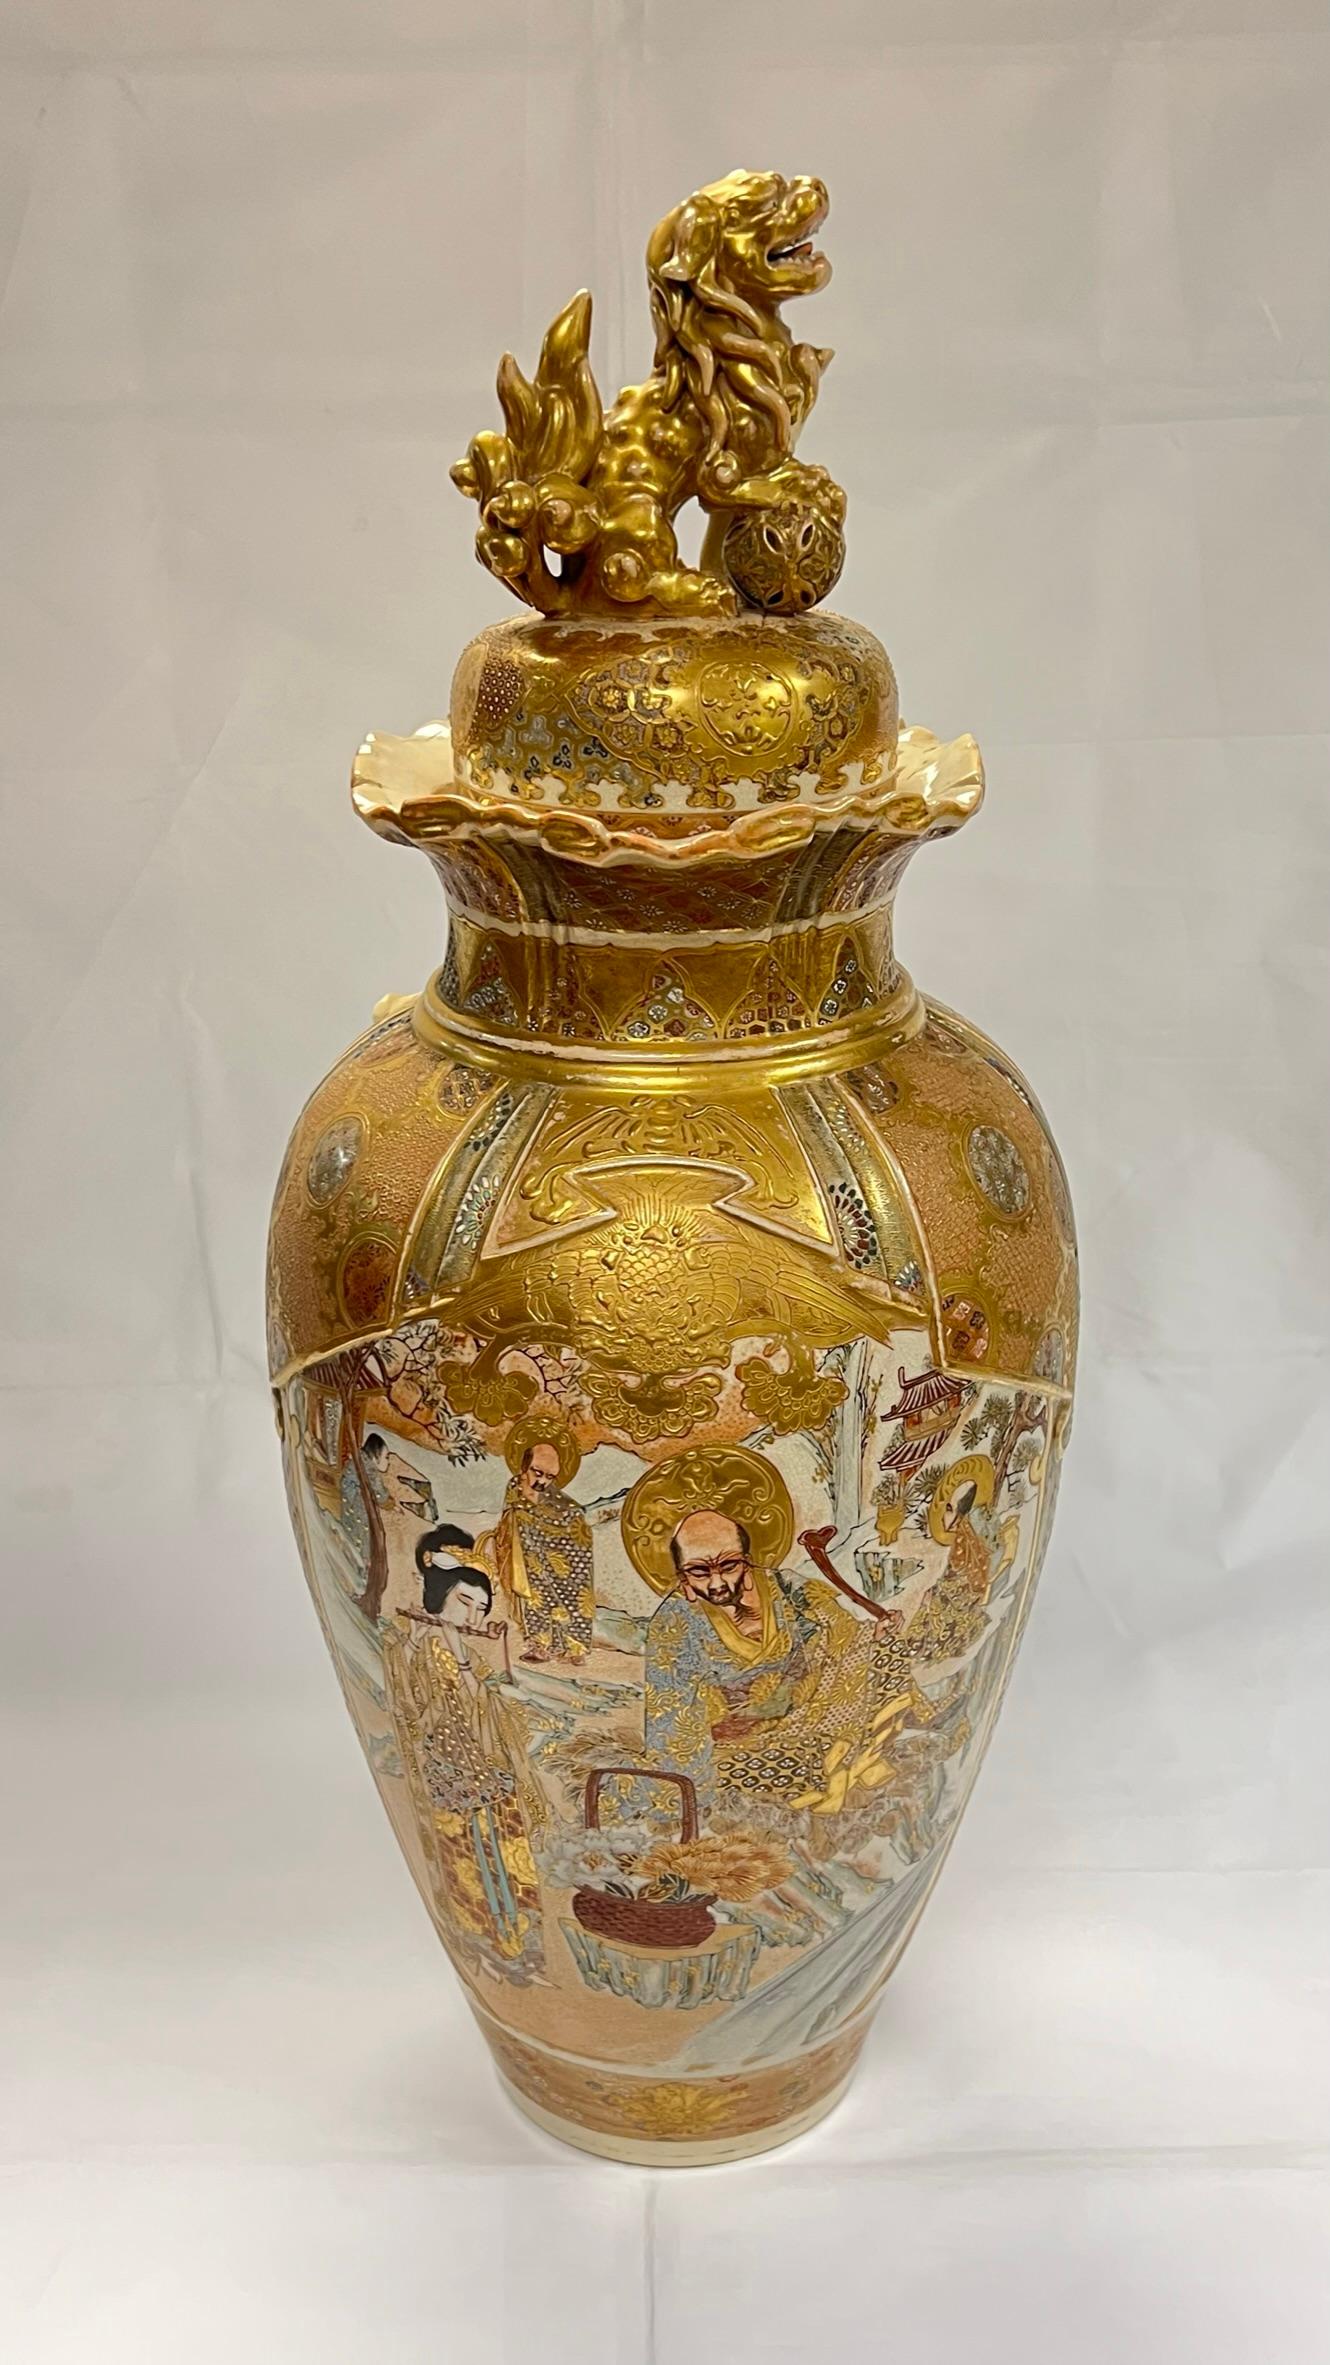 Exceptional and large Satsuma vase with cover with foo dog finial, finely enameled and gilt.  Drilled apparently for use previously as table lamp.  Firing crack to the lid, otherwise in excellent condition.